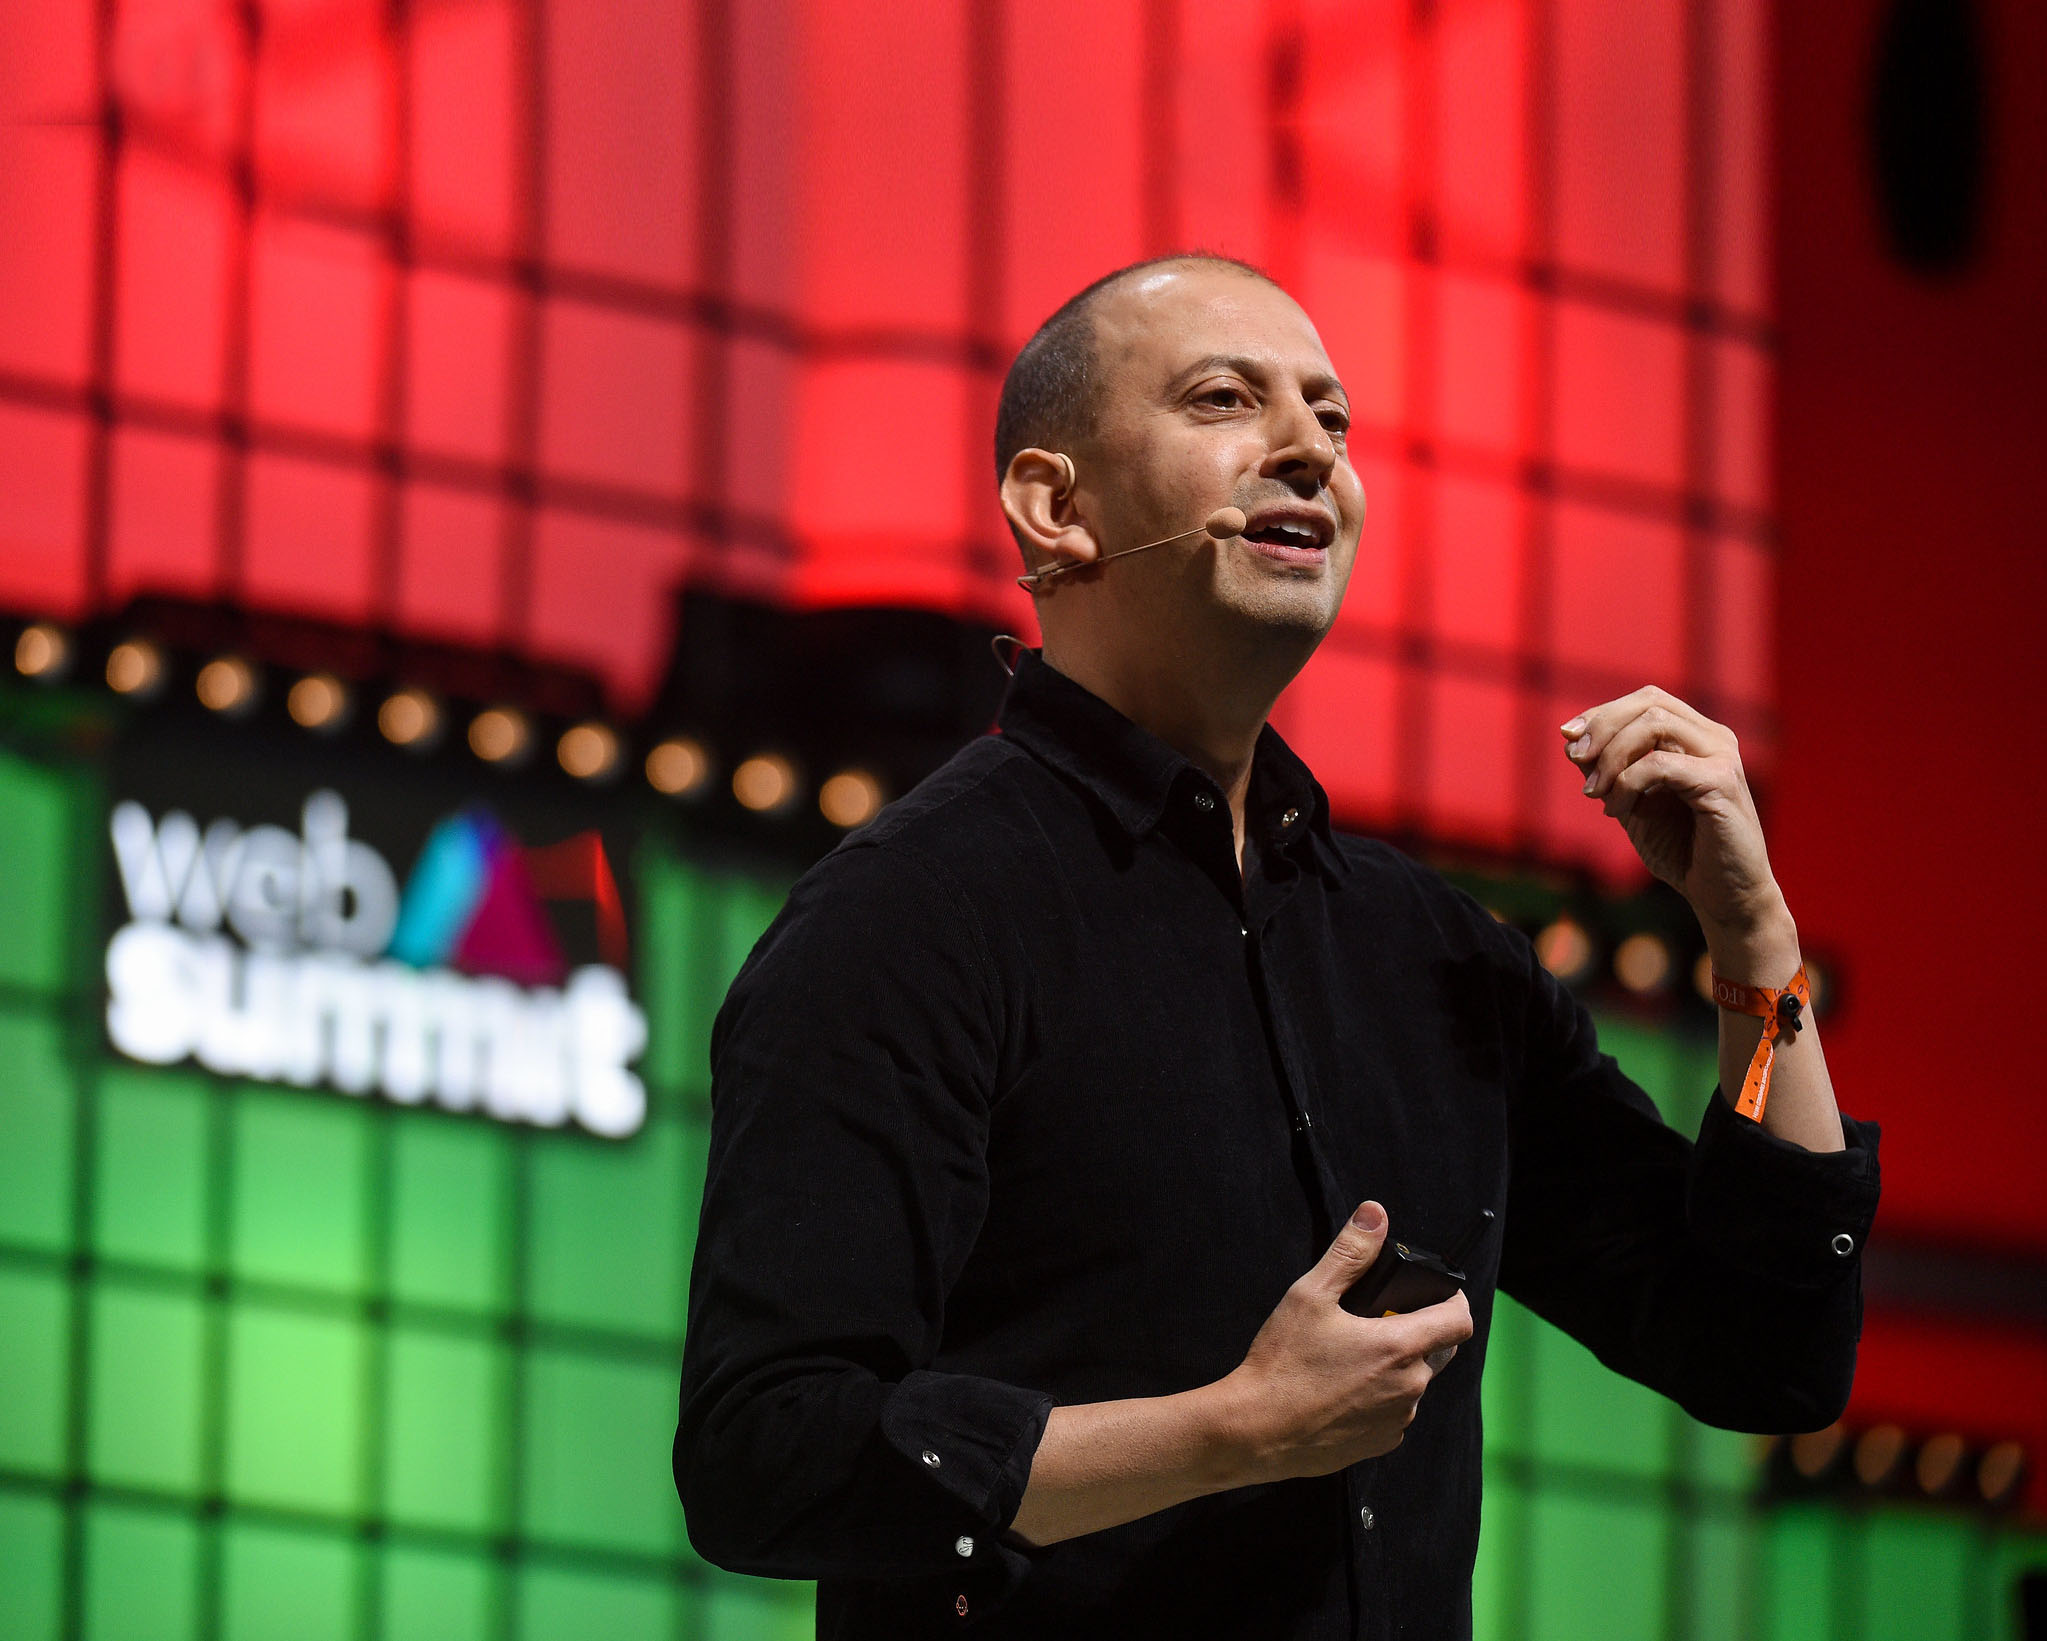 A photograph of David Wallerstein, chief exploration officer at Tencent Holdings, speaking on Centre Stage at Web Summit. David is gesturing using hands, and appears to be speaking to a crowd. David is wearing an on-ear microphone. The photograph is zoomed-in, and only the upper section of David's body is visible.